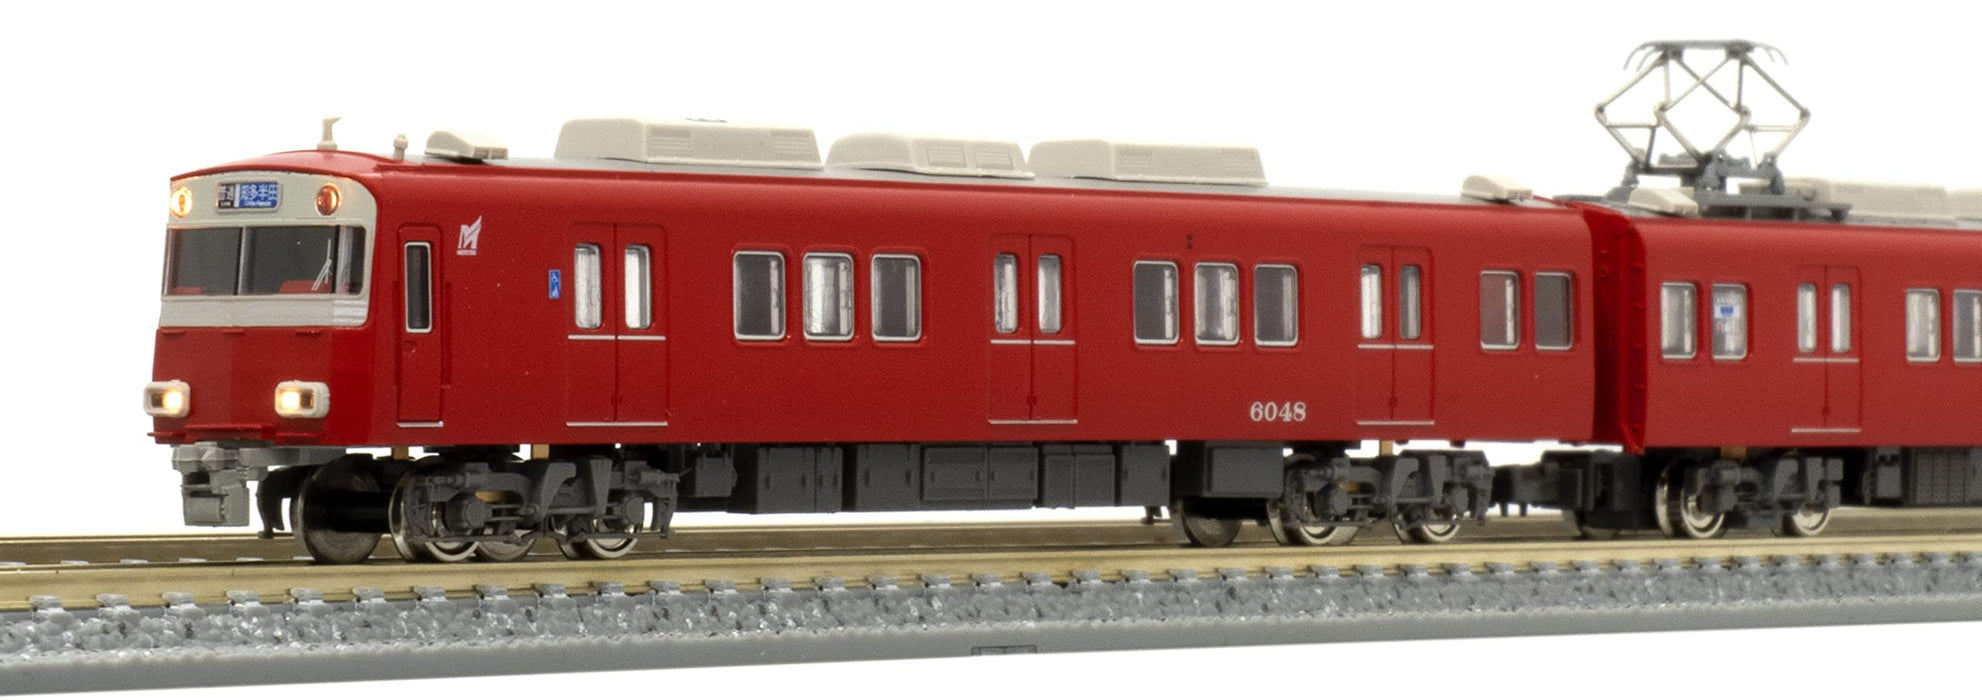 GREENMAX 31529 Meitetsu Series 6000 9Th/6048 Configuration 2 Cars Set N Scale